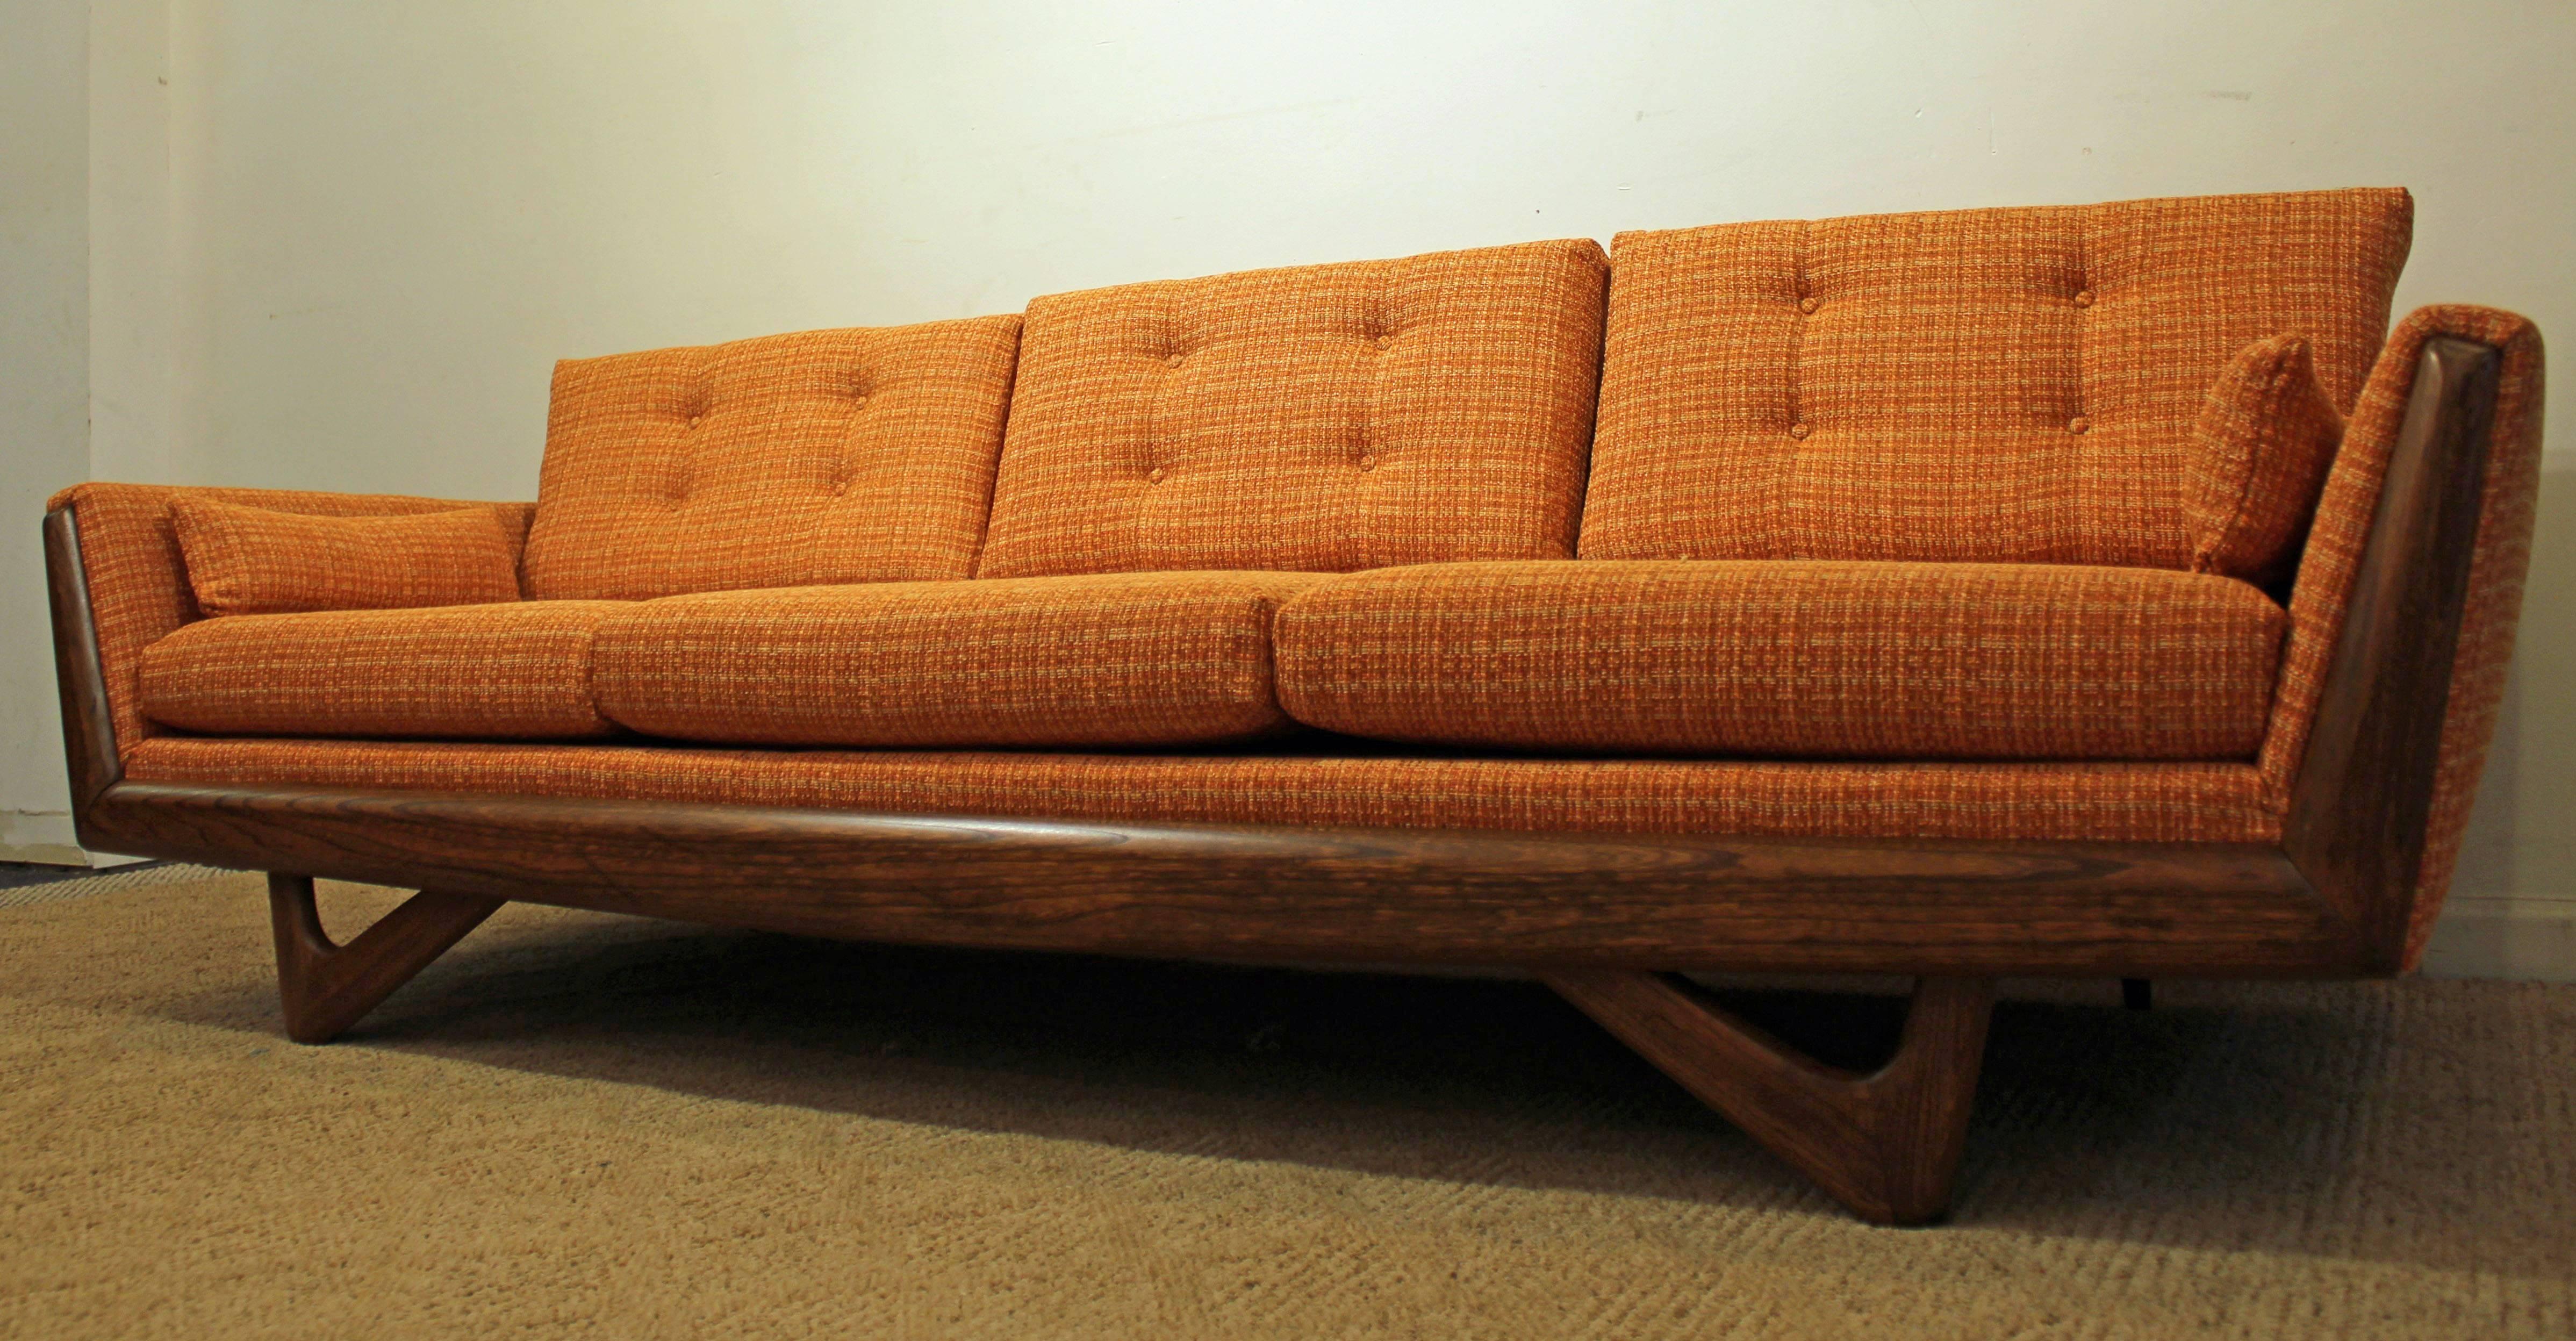 Offered is a gondola sofa similar to the style of Adrian Pearsall. It has been completely restored with new upholstery, cushions, and refinished walnut base.